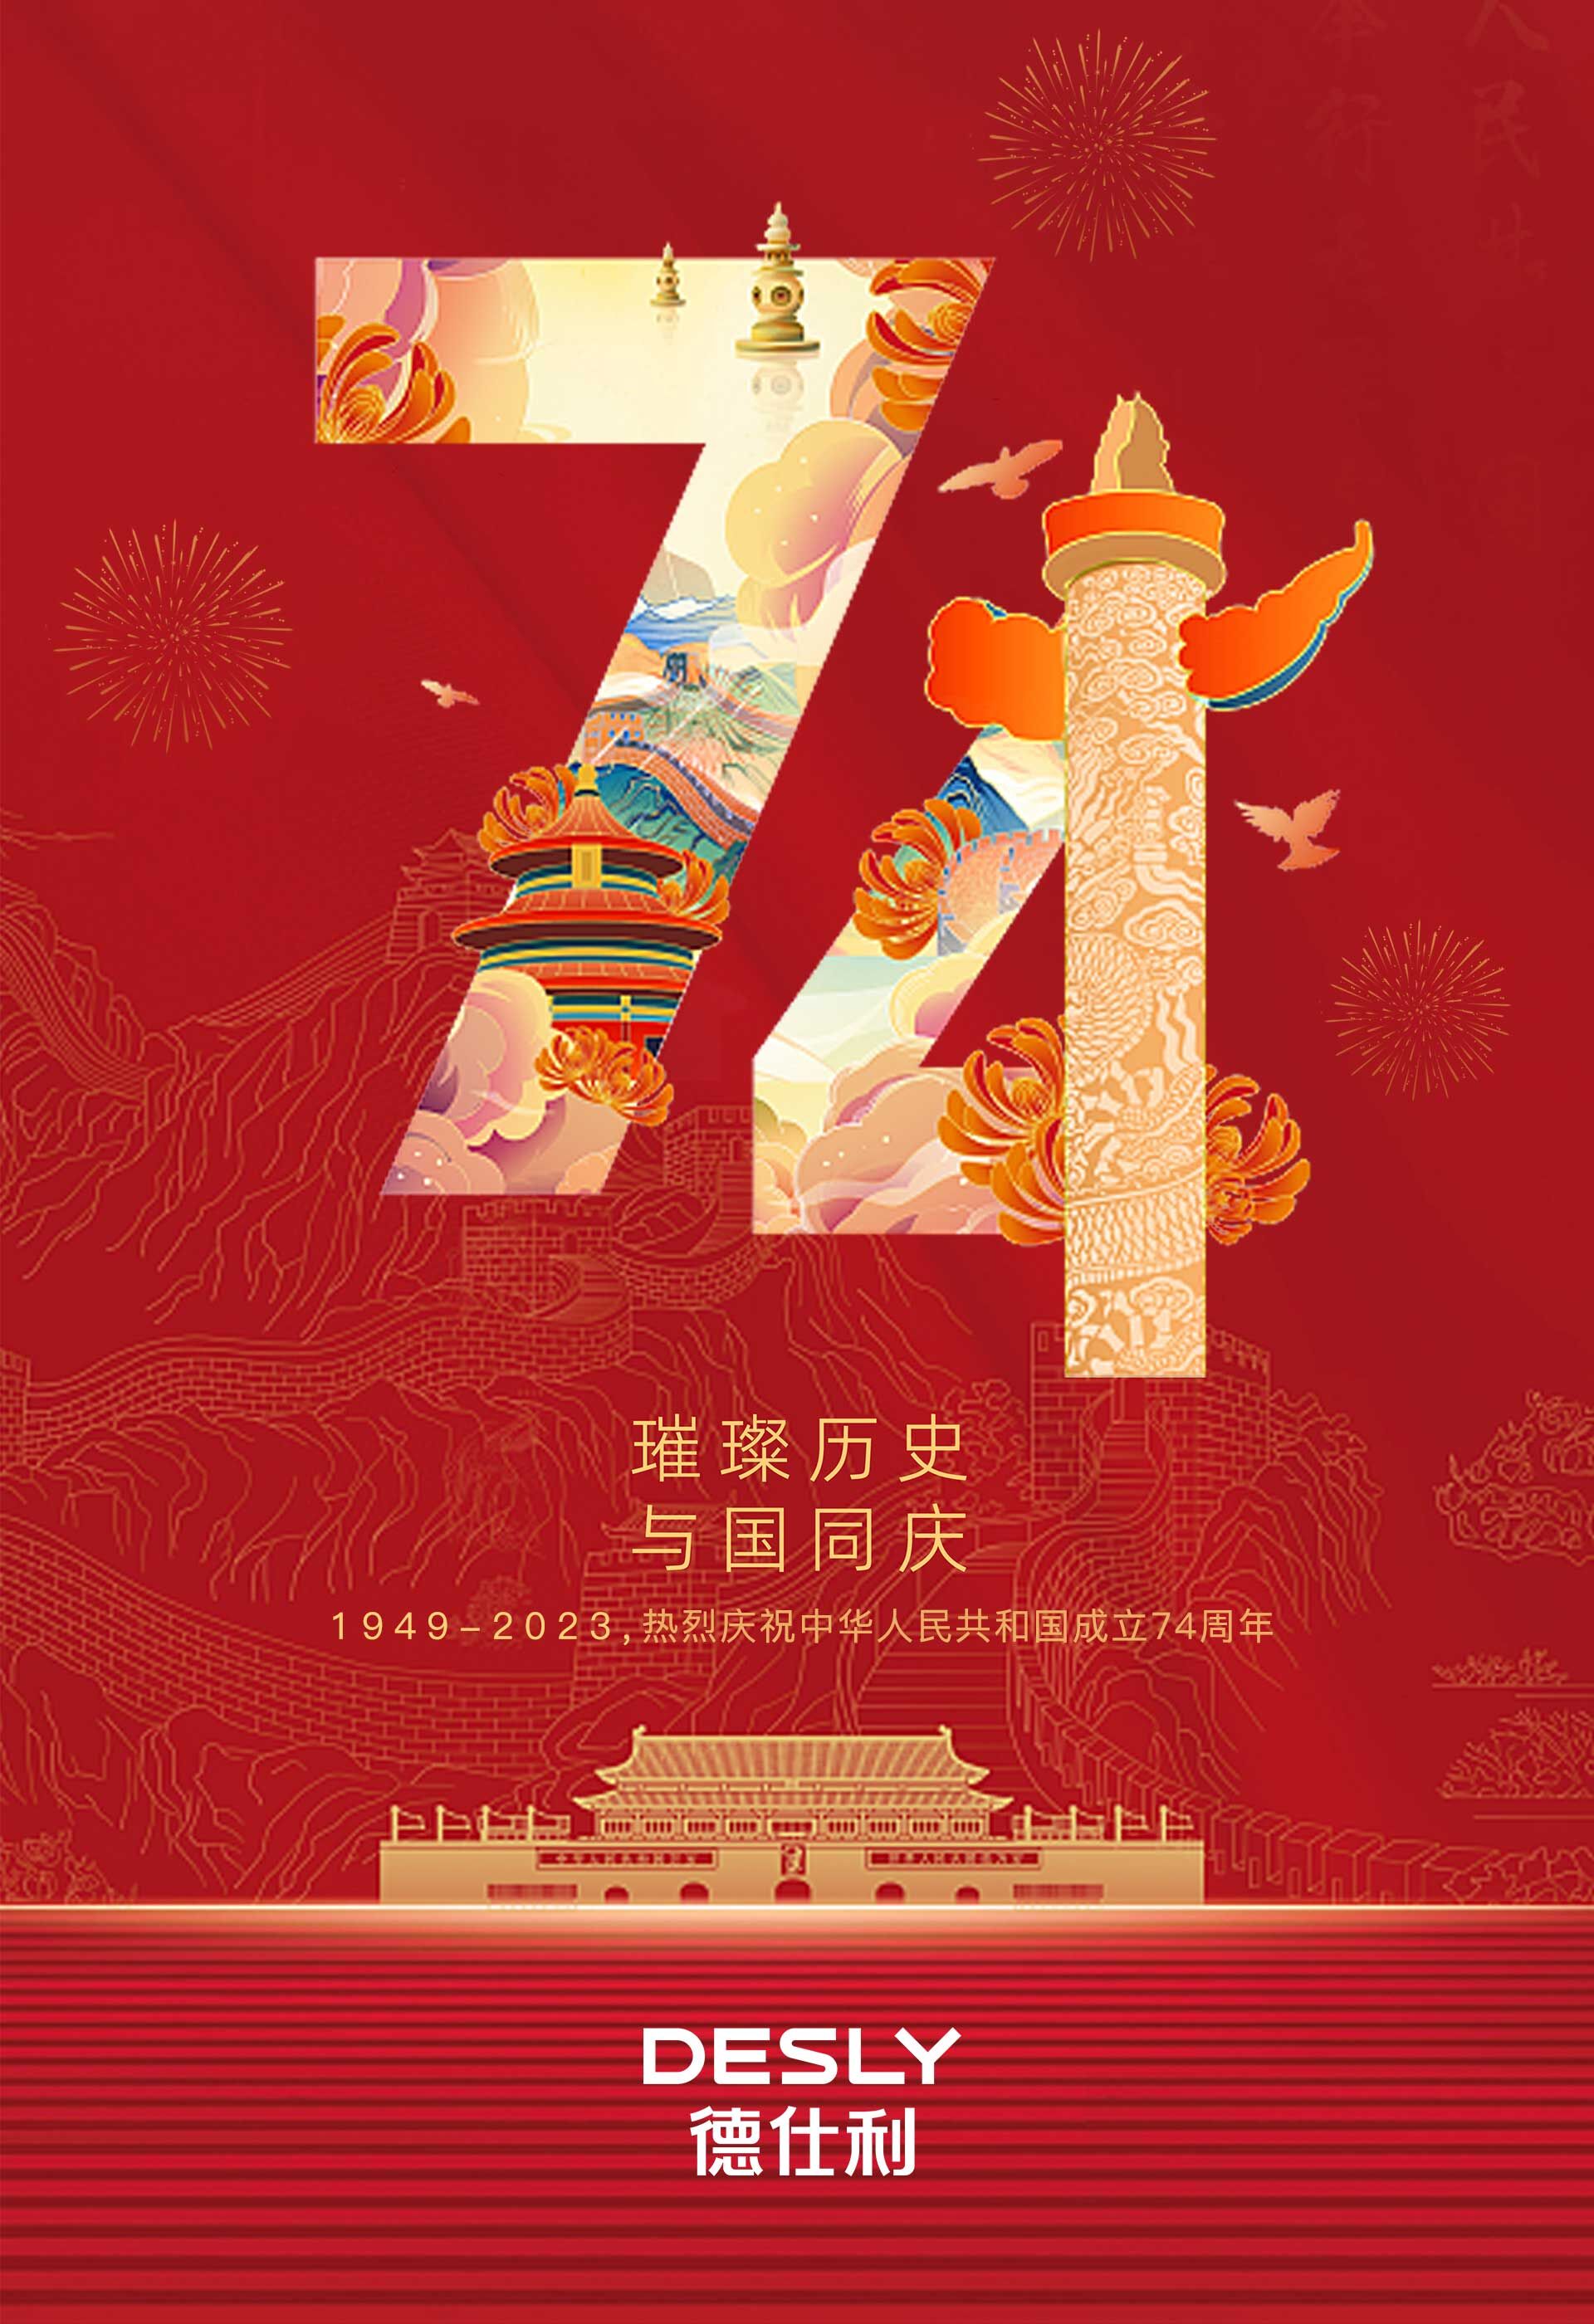 Chinese National Day2023- Desly.jpg